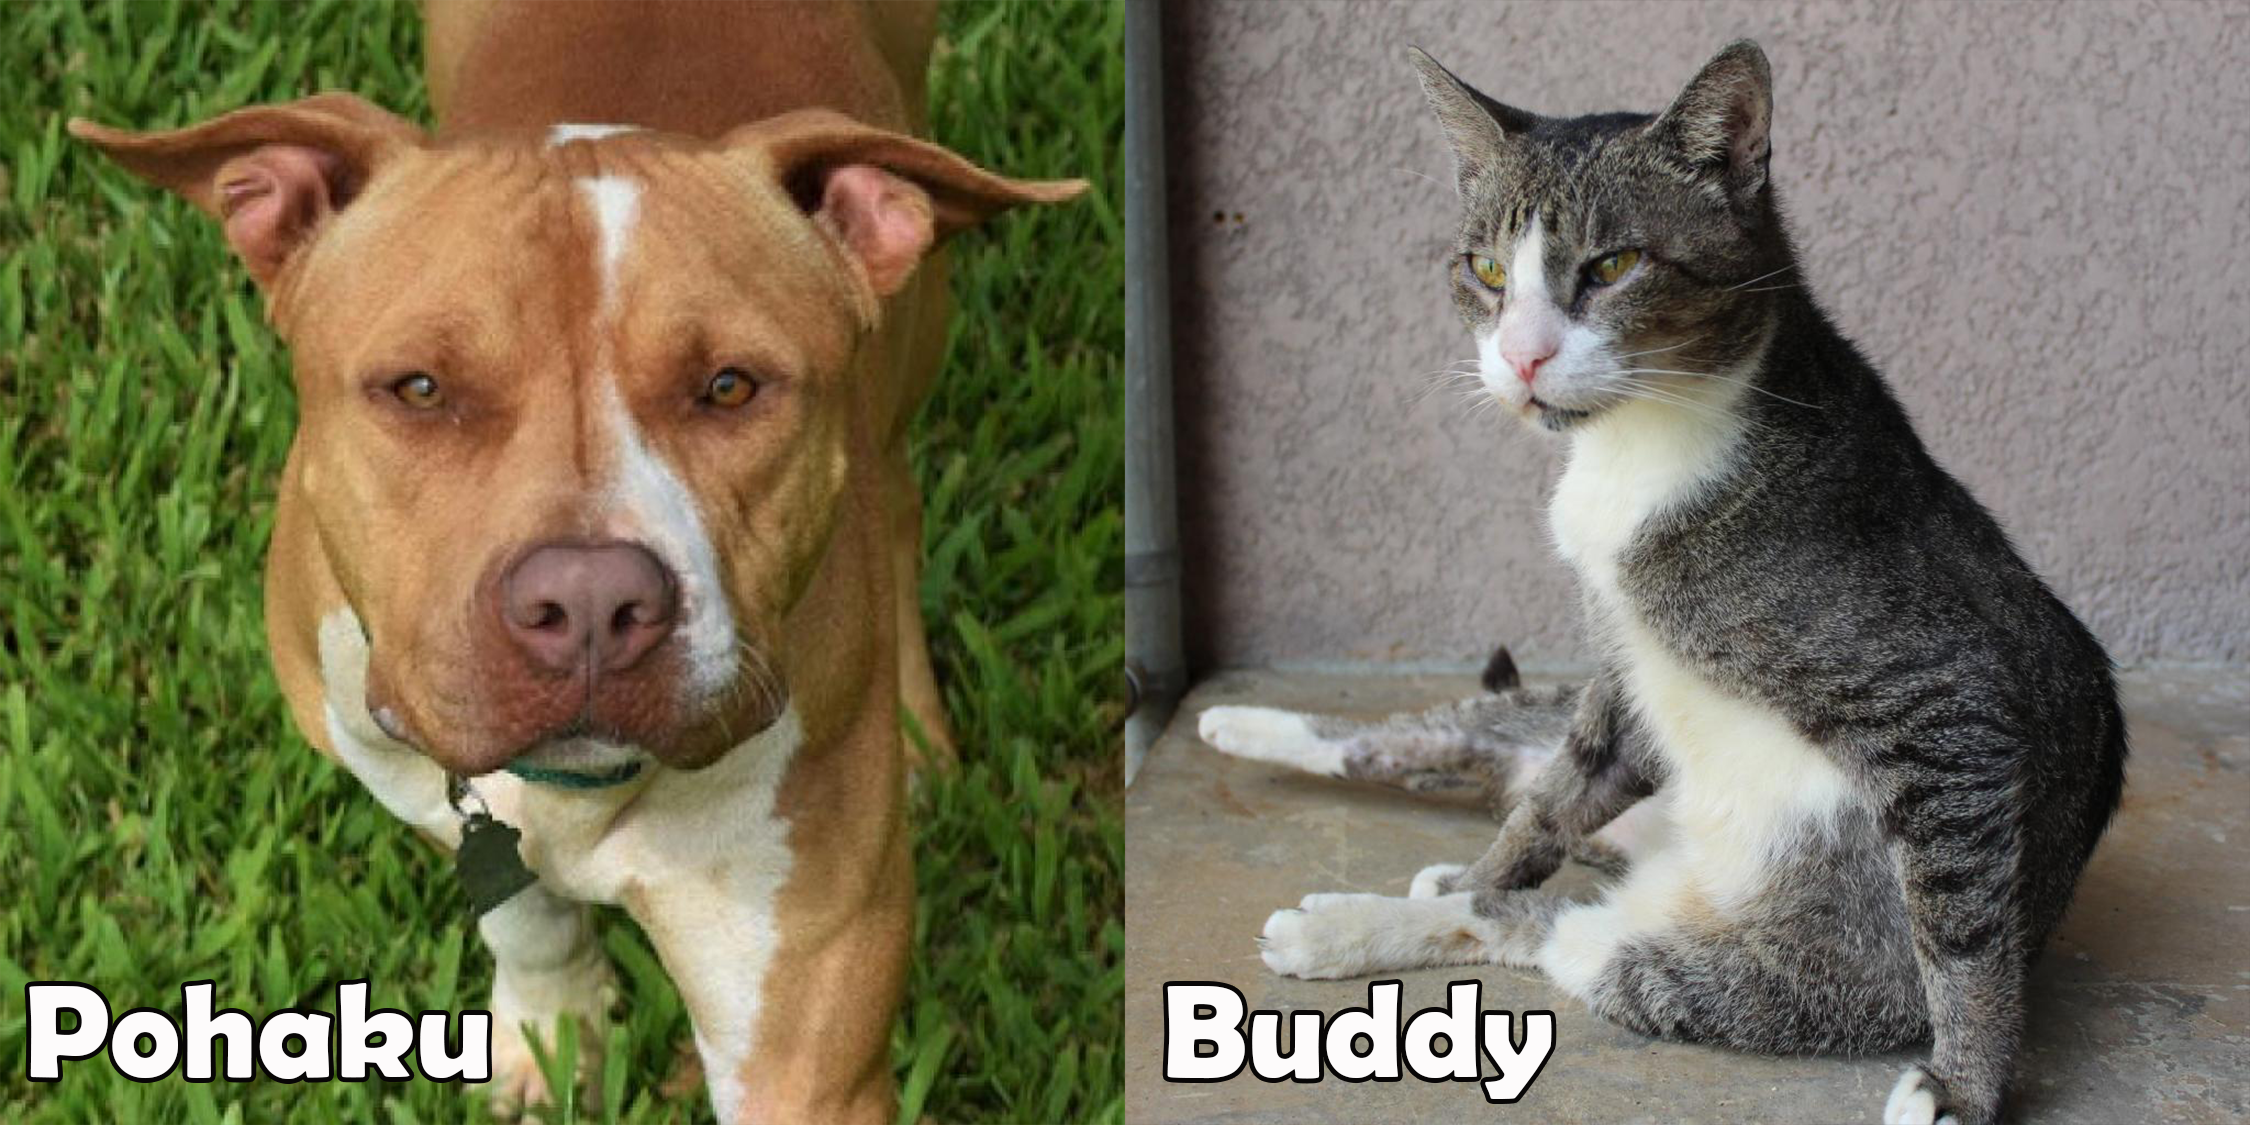 Pohaku and Buddy are our two featured pets of the month.